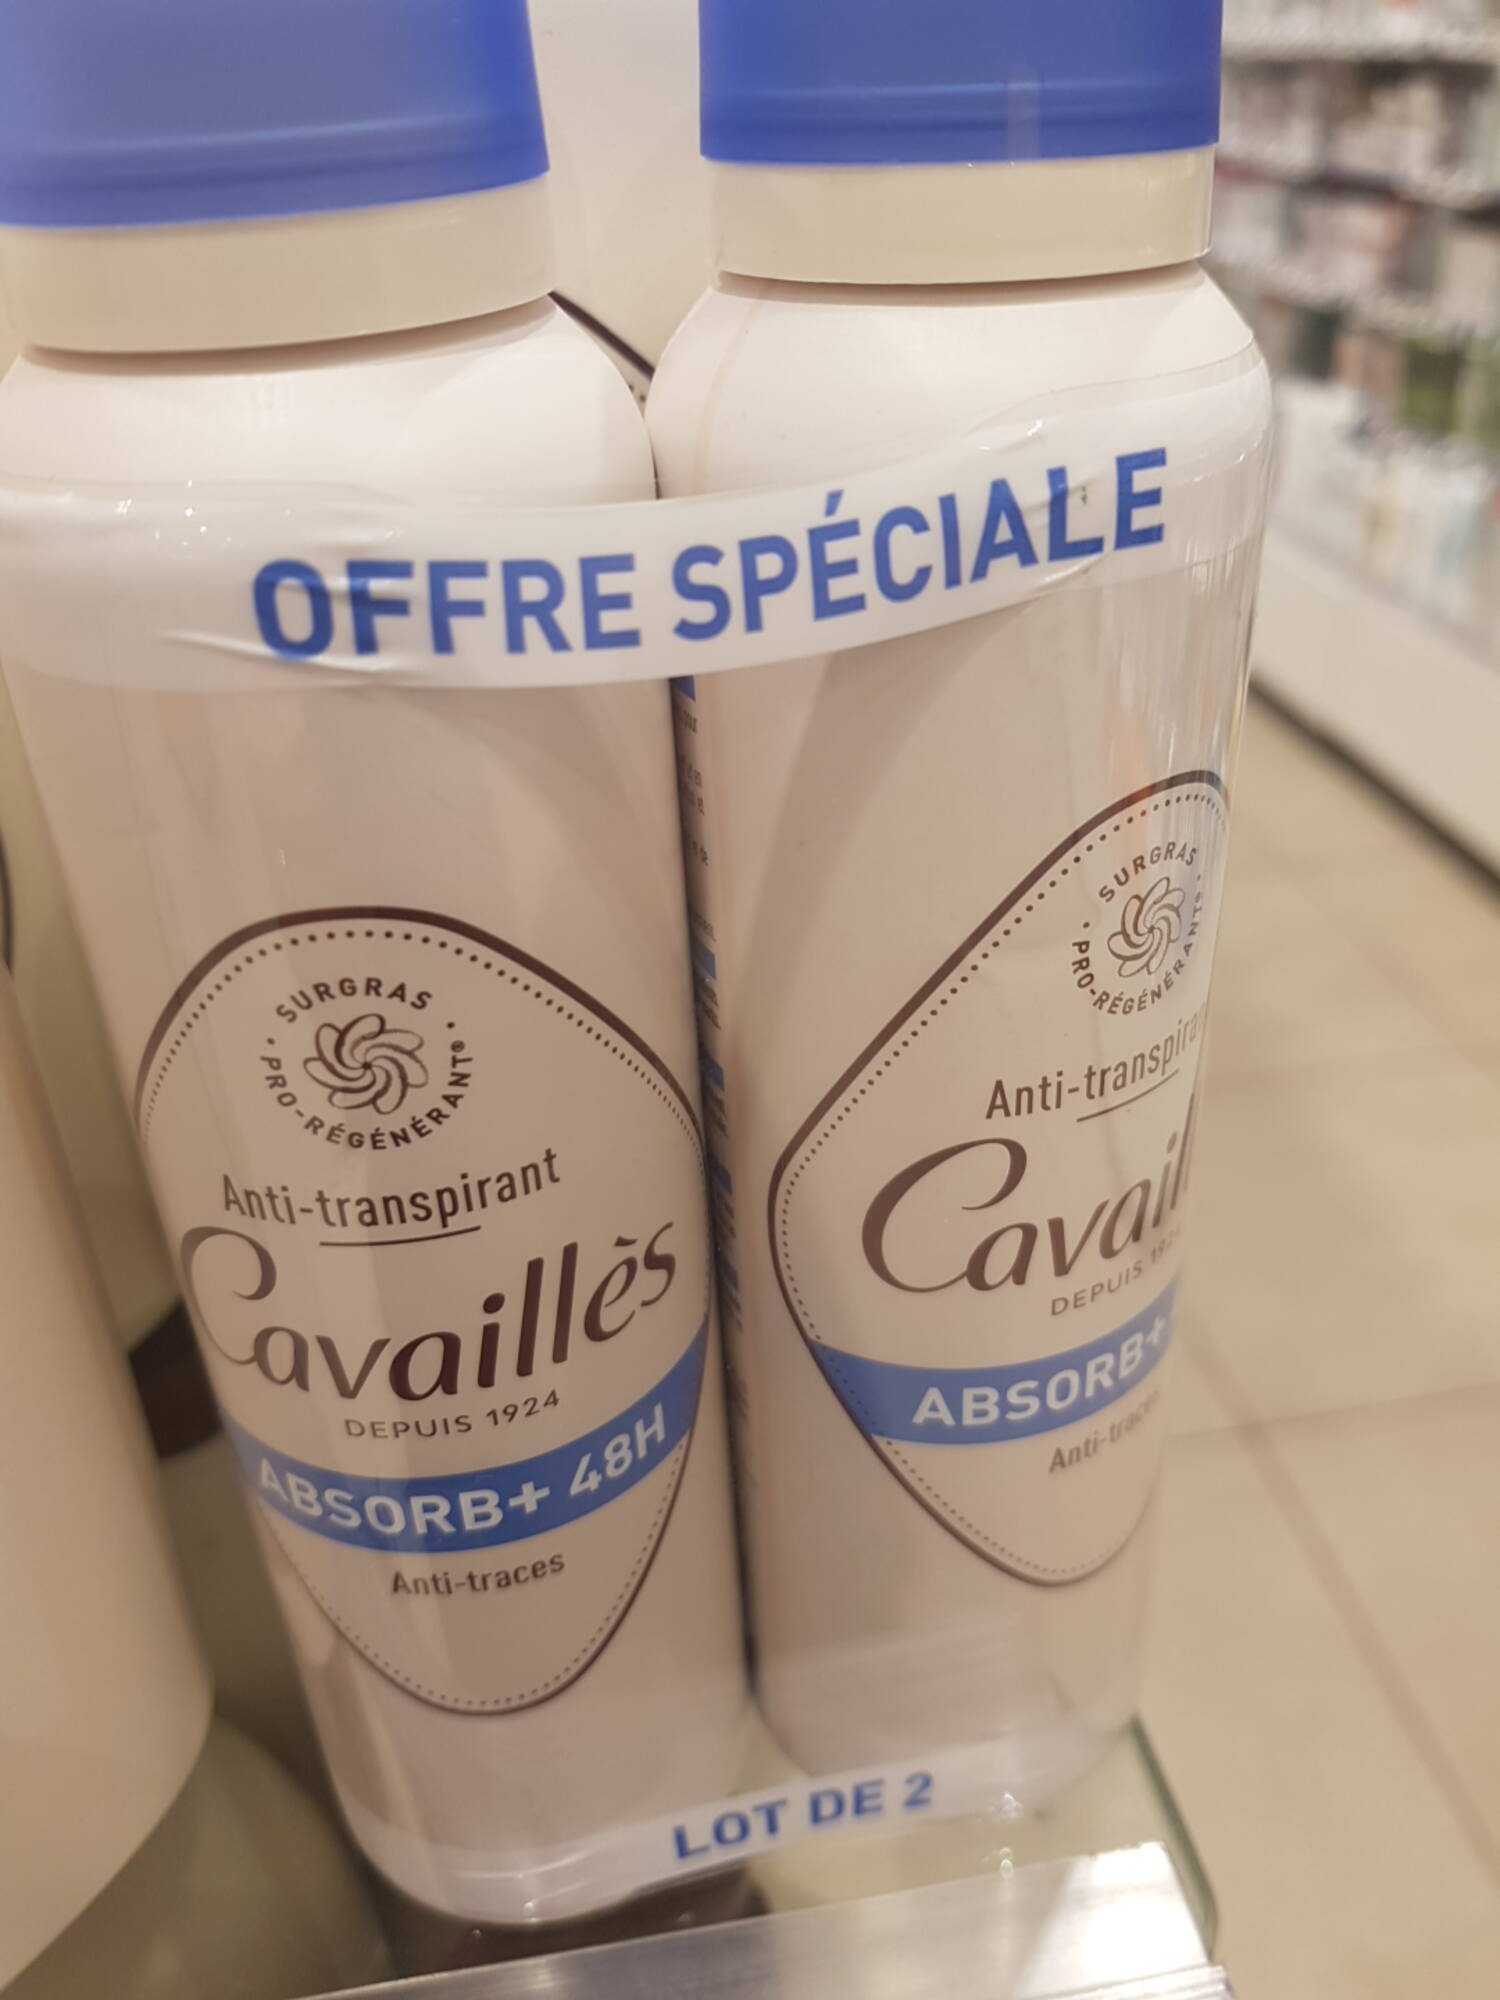 CAVAILLES - Anti-transpirant absorb+ 48h